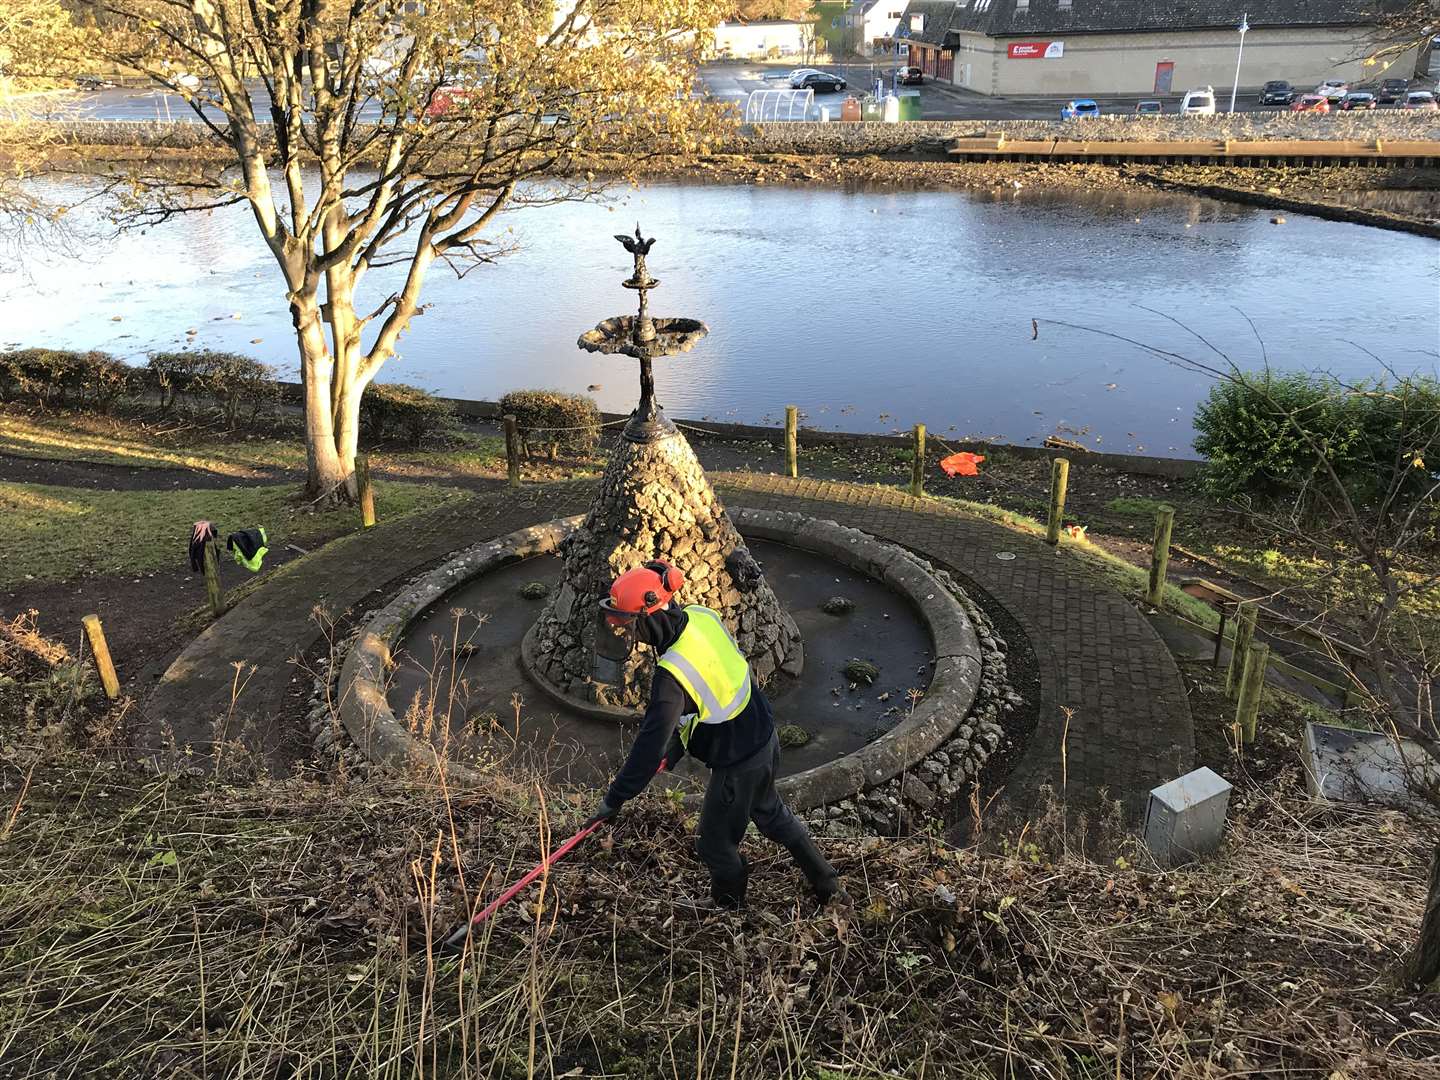 ScottishPower Renewables carried out a range of environmental enhancements at Wick's riverside area.